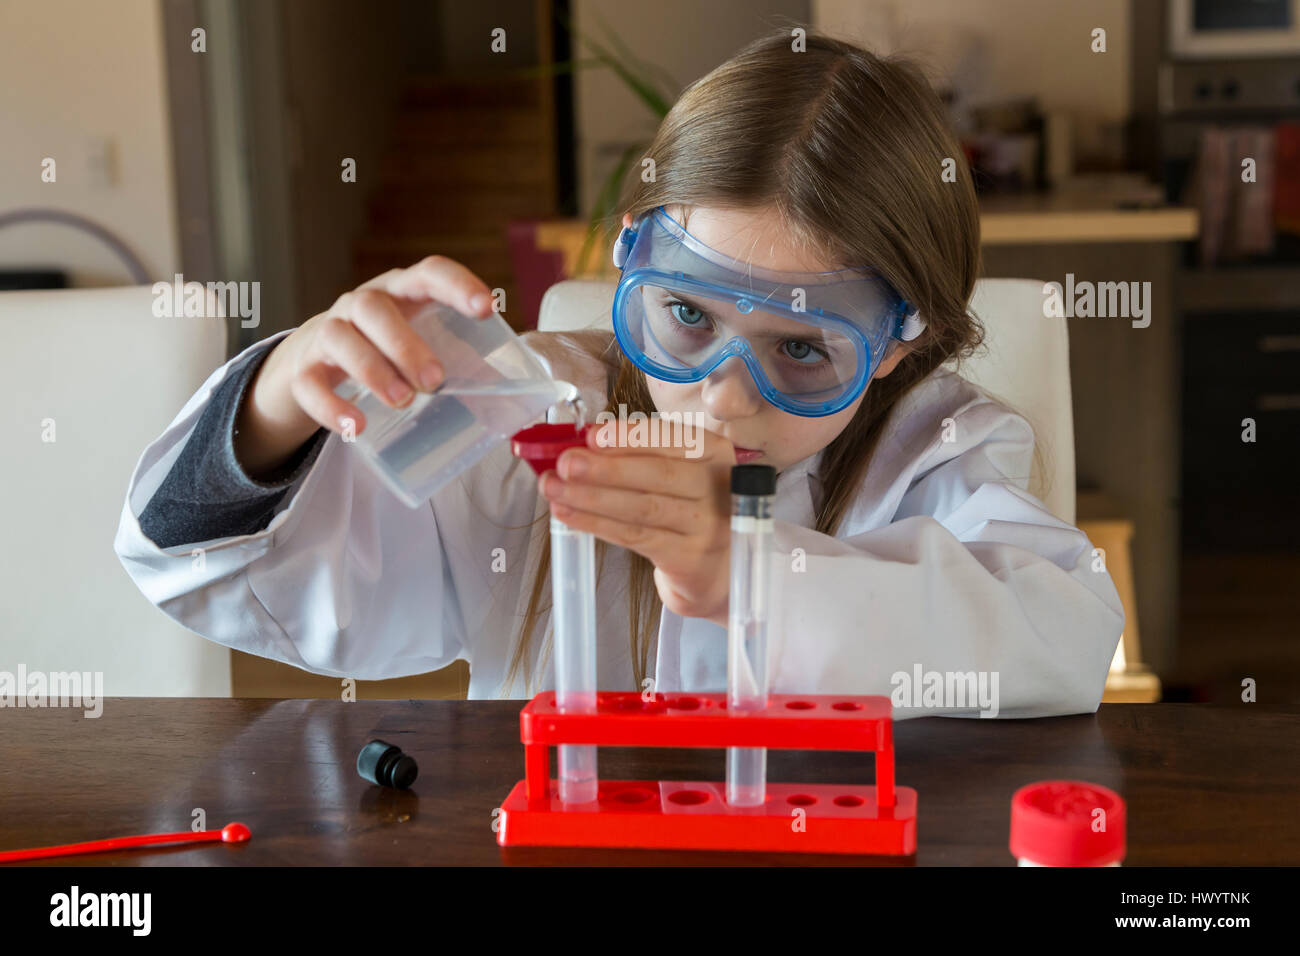 Girl wearing work coat and safety glasses using chemistry set at home Stock Photo